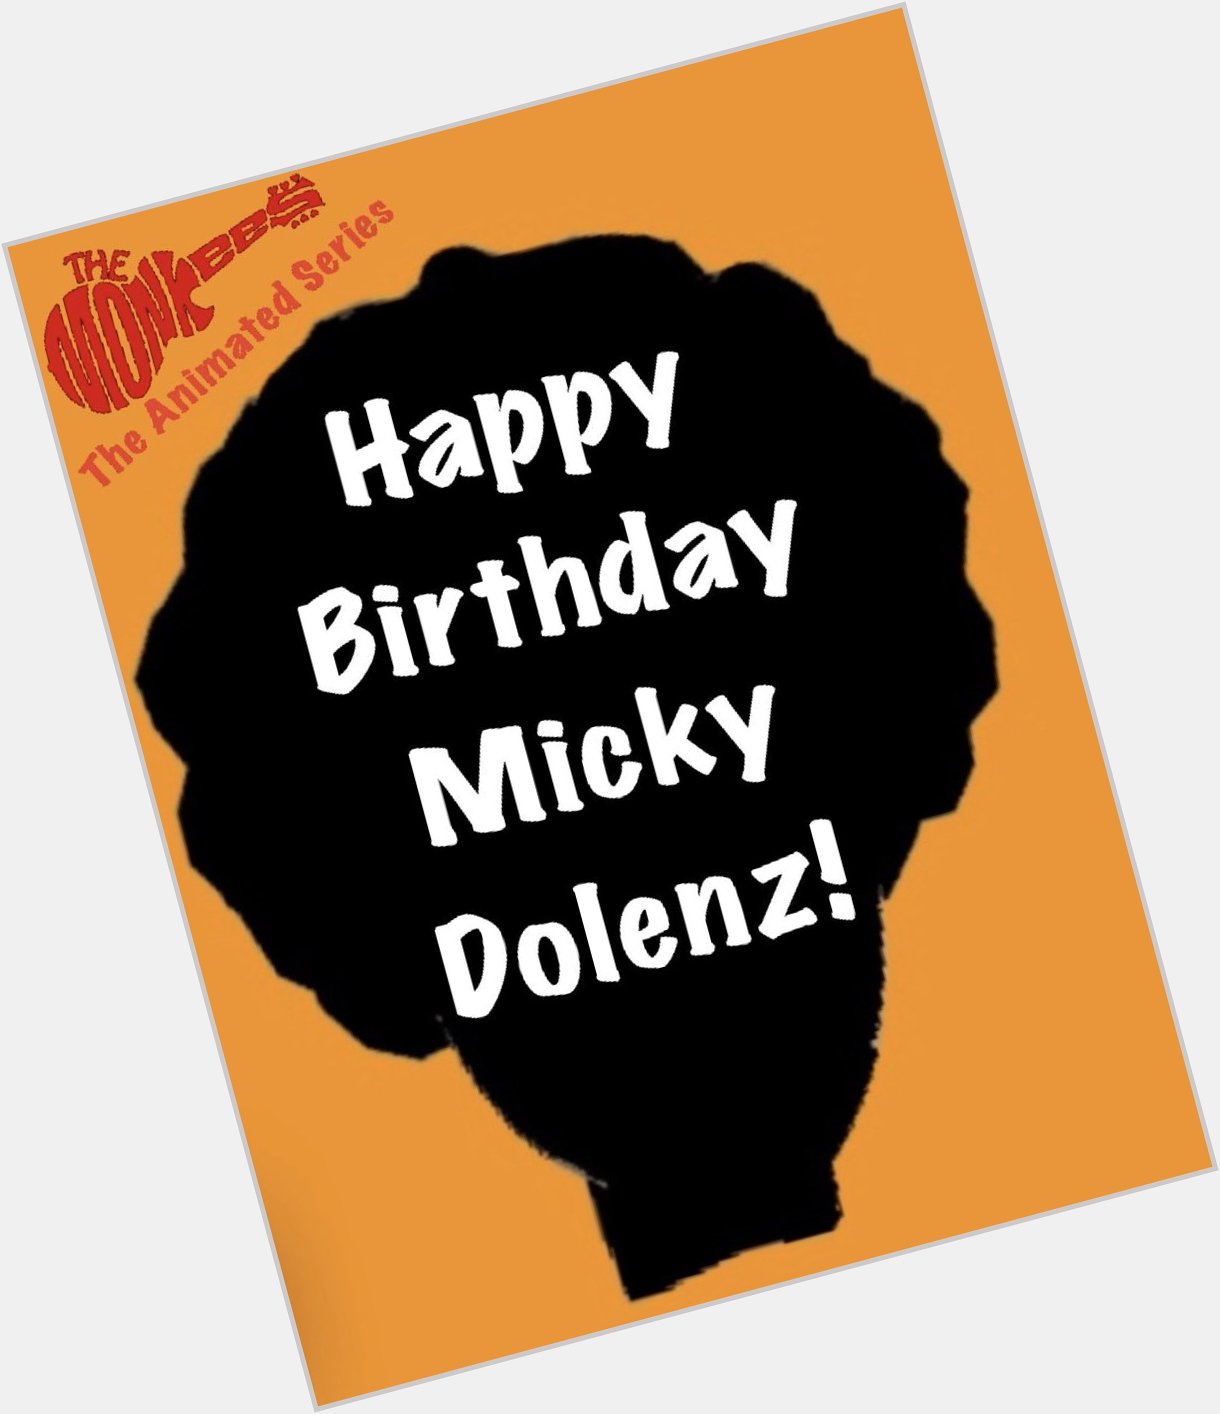 Happy Birthday to a member of the greatest TV show and group ever, Micky Dolenz!!!    